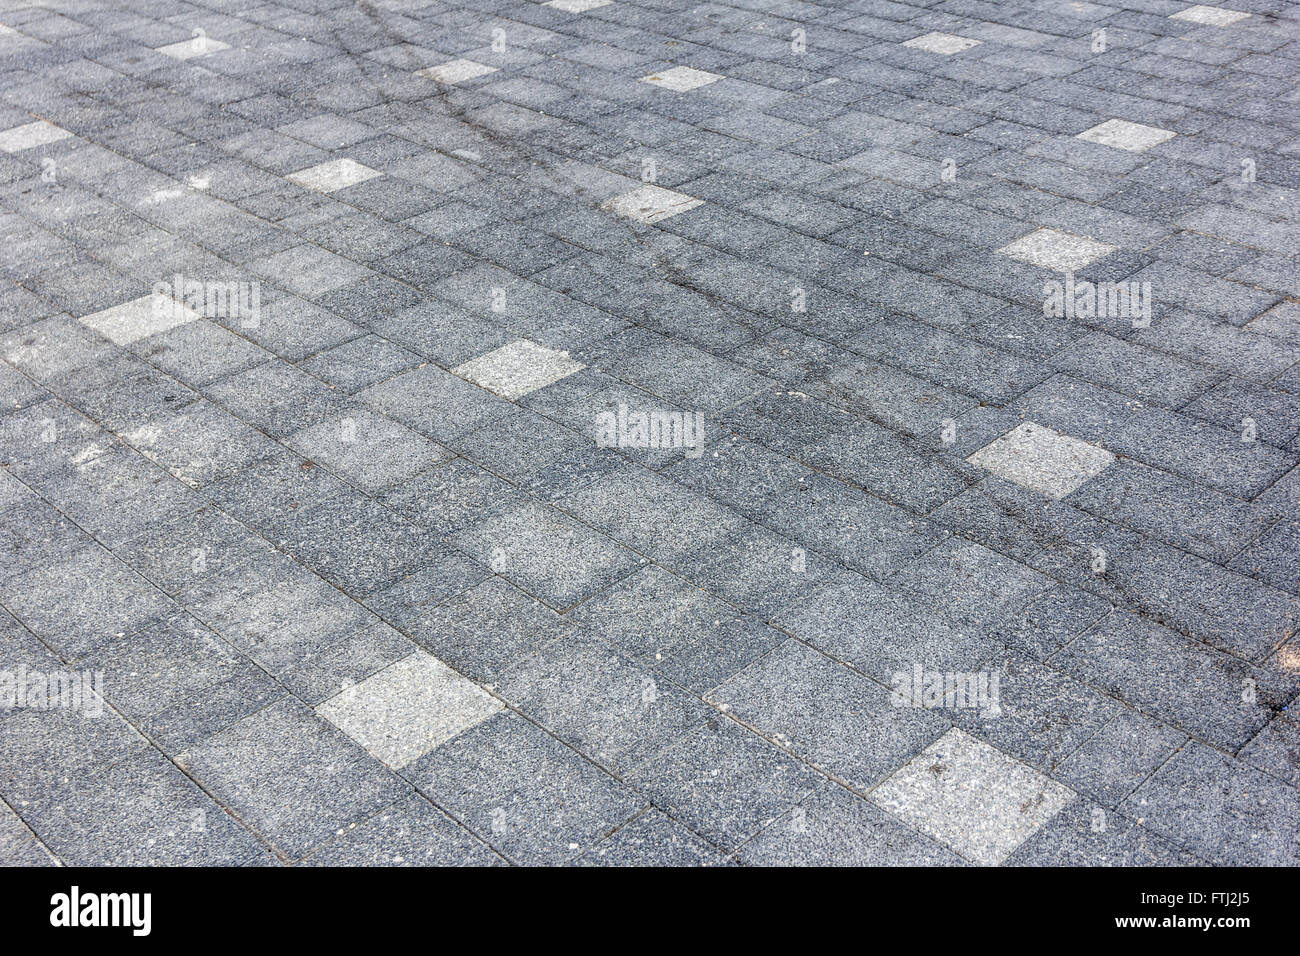 Perspective View of Monotone Gray dirty Brick Stone Street Road. Sidewalk, Pavement Texture Background Stock Photo